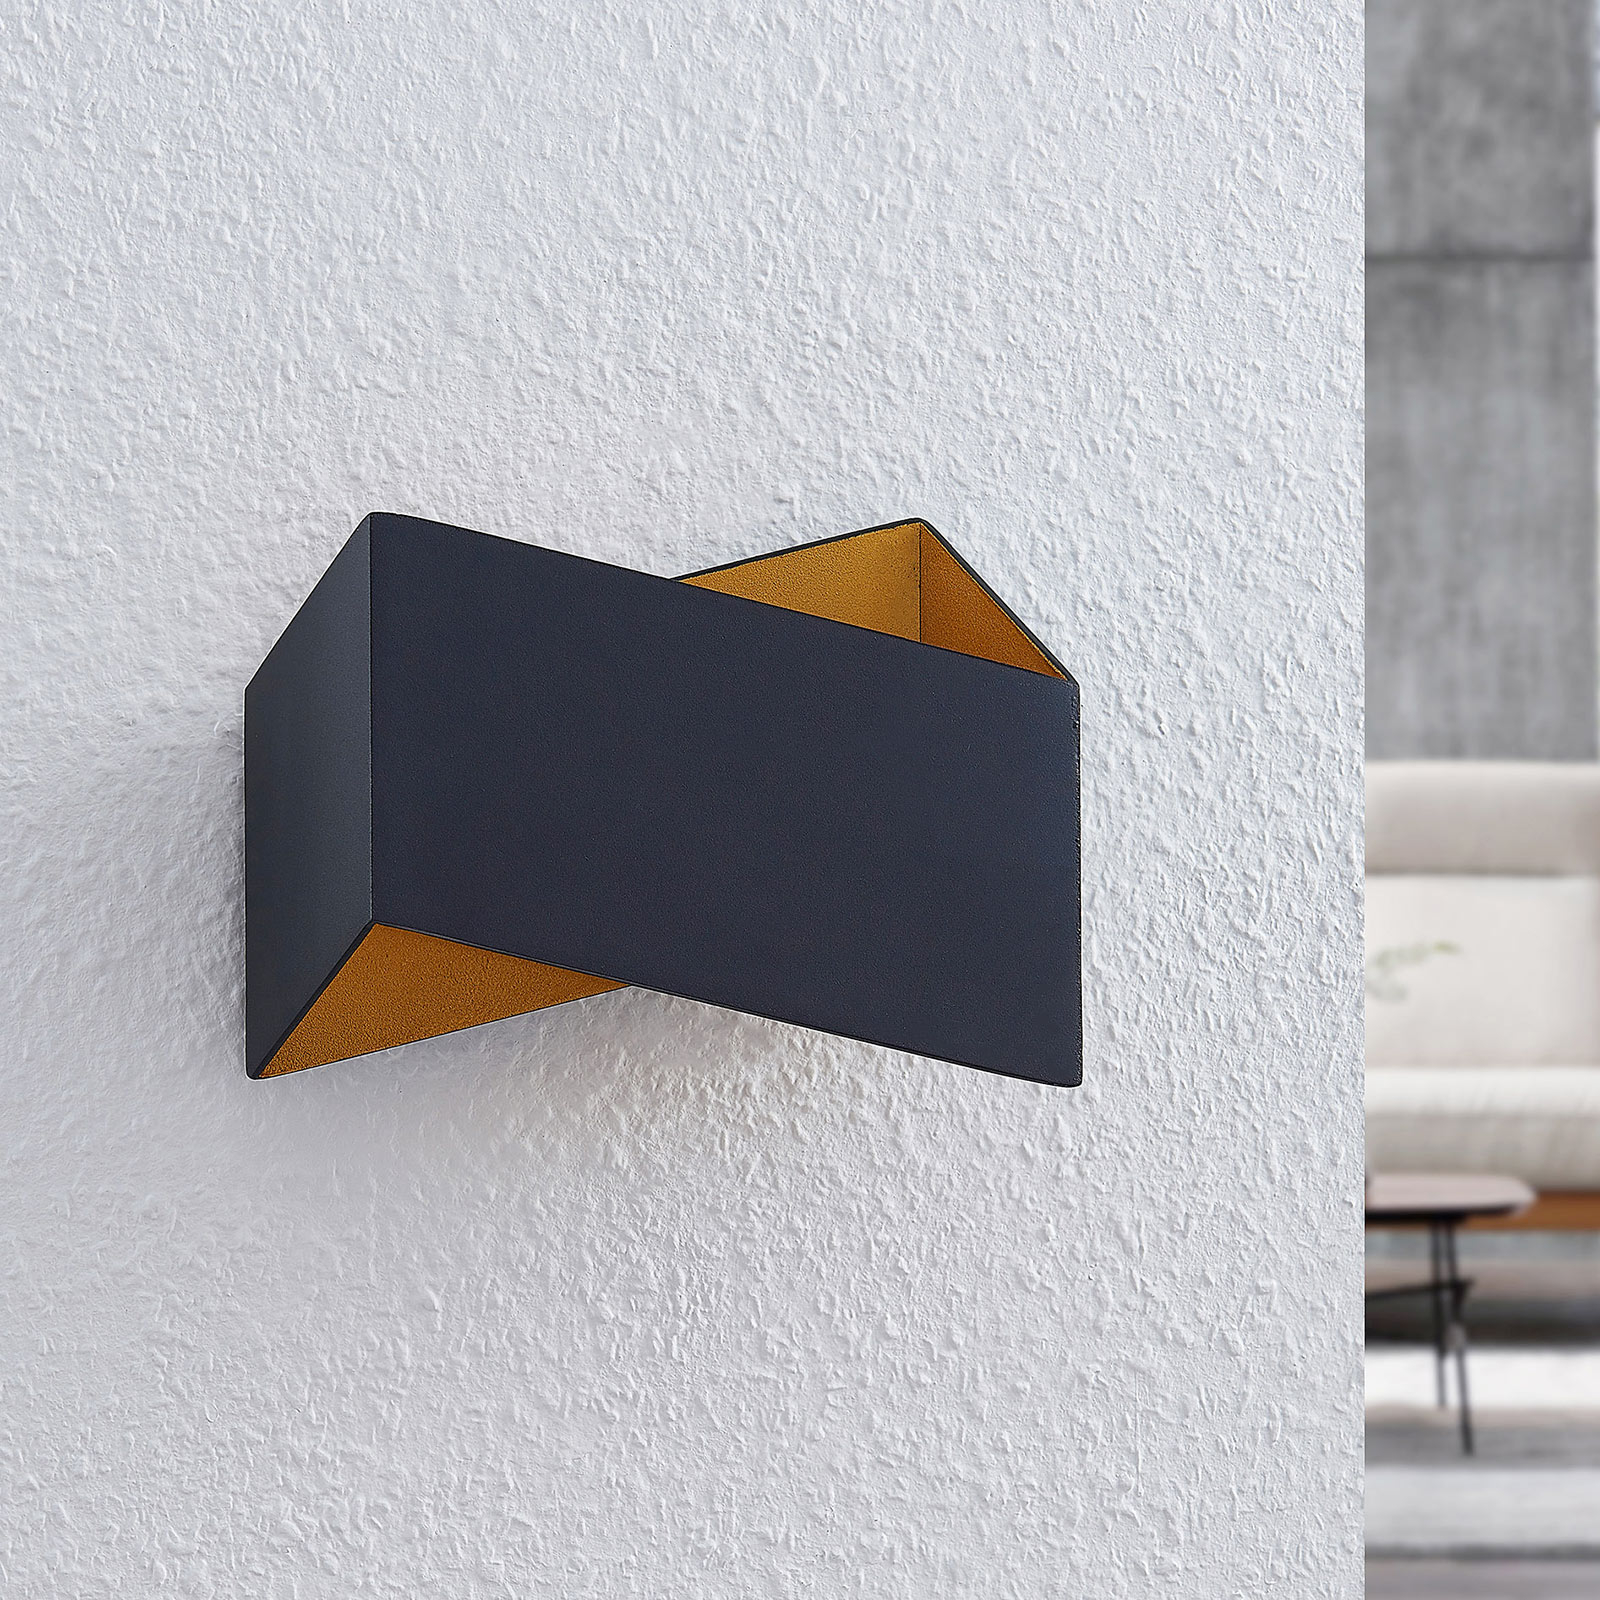 Arcchio Assona wall light, black and gold